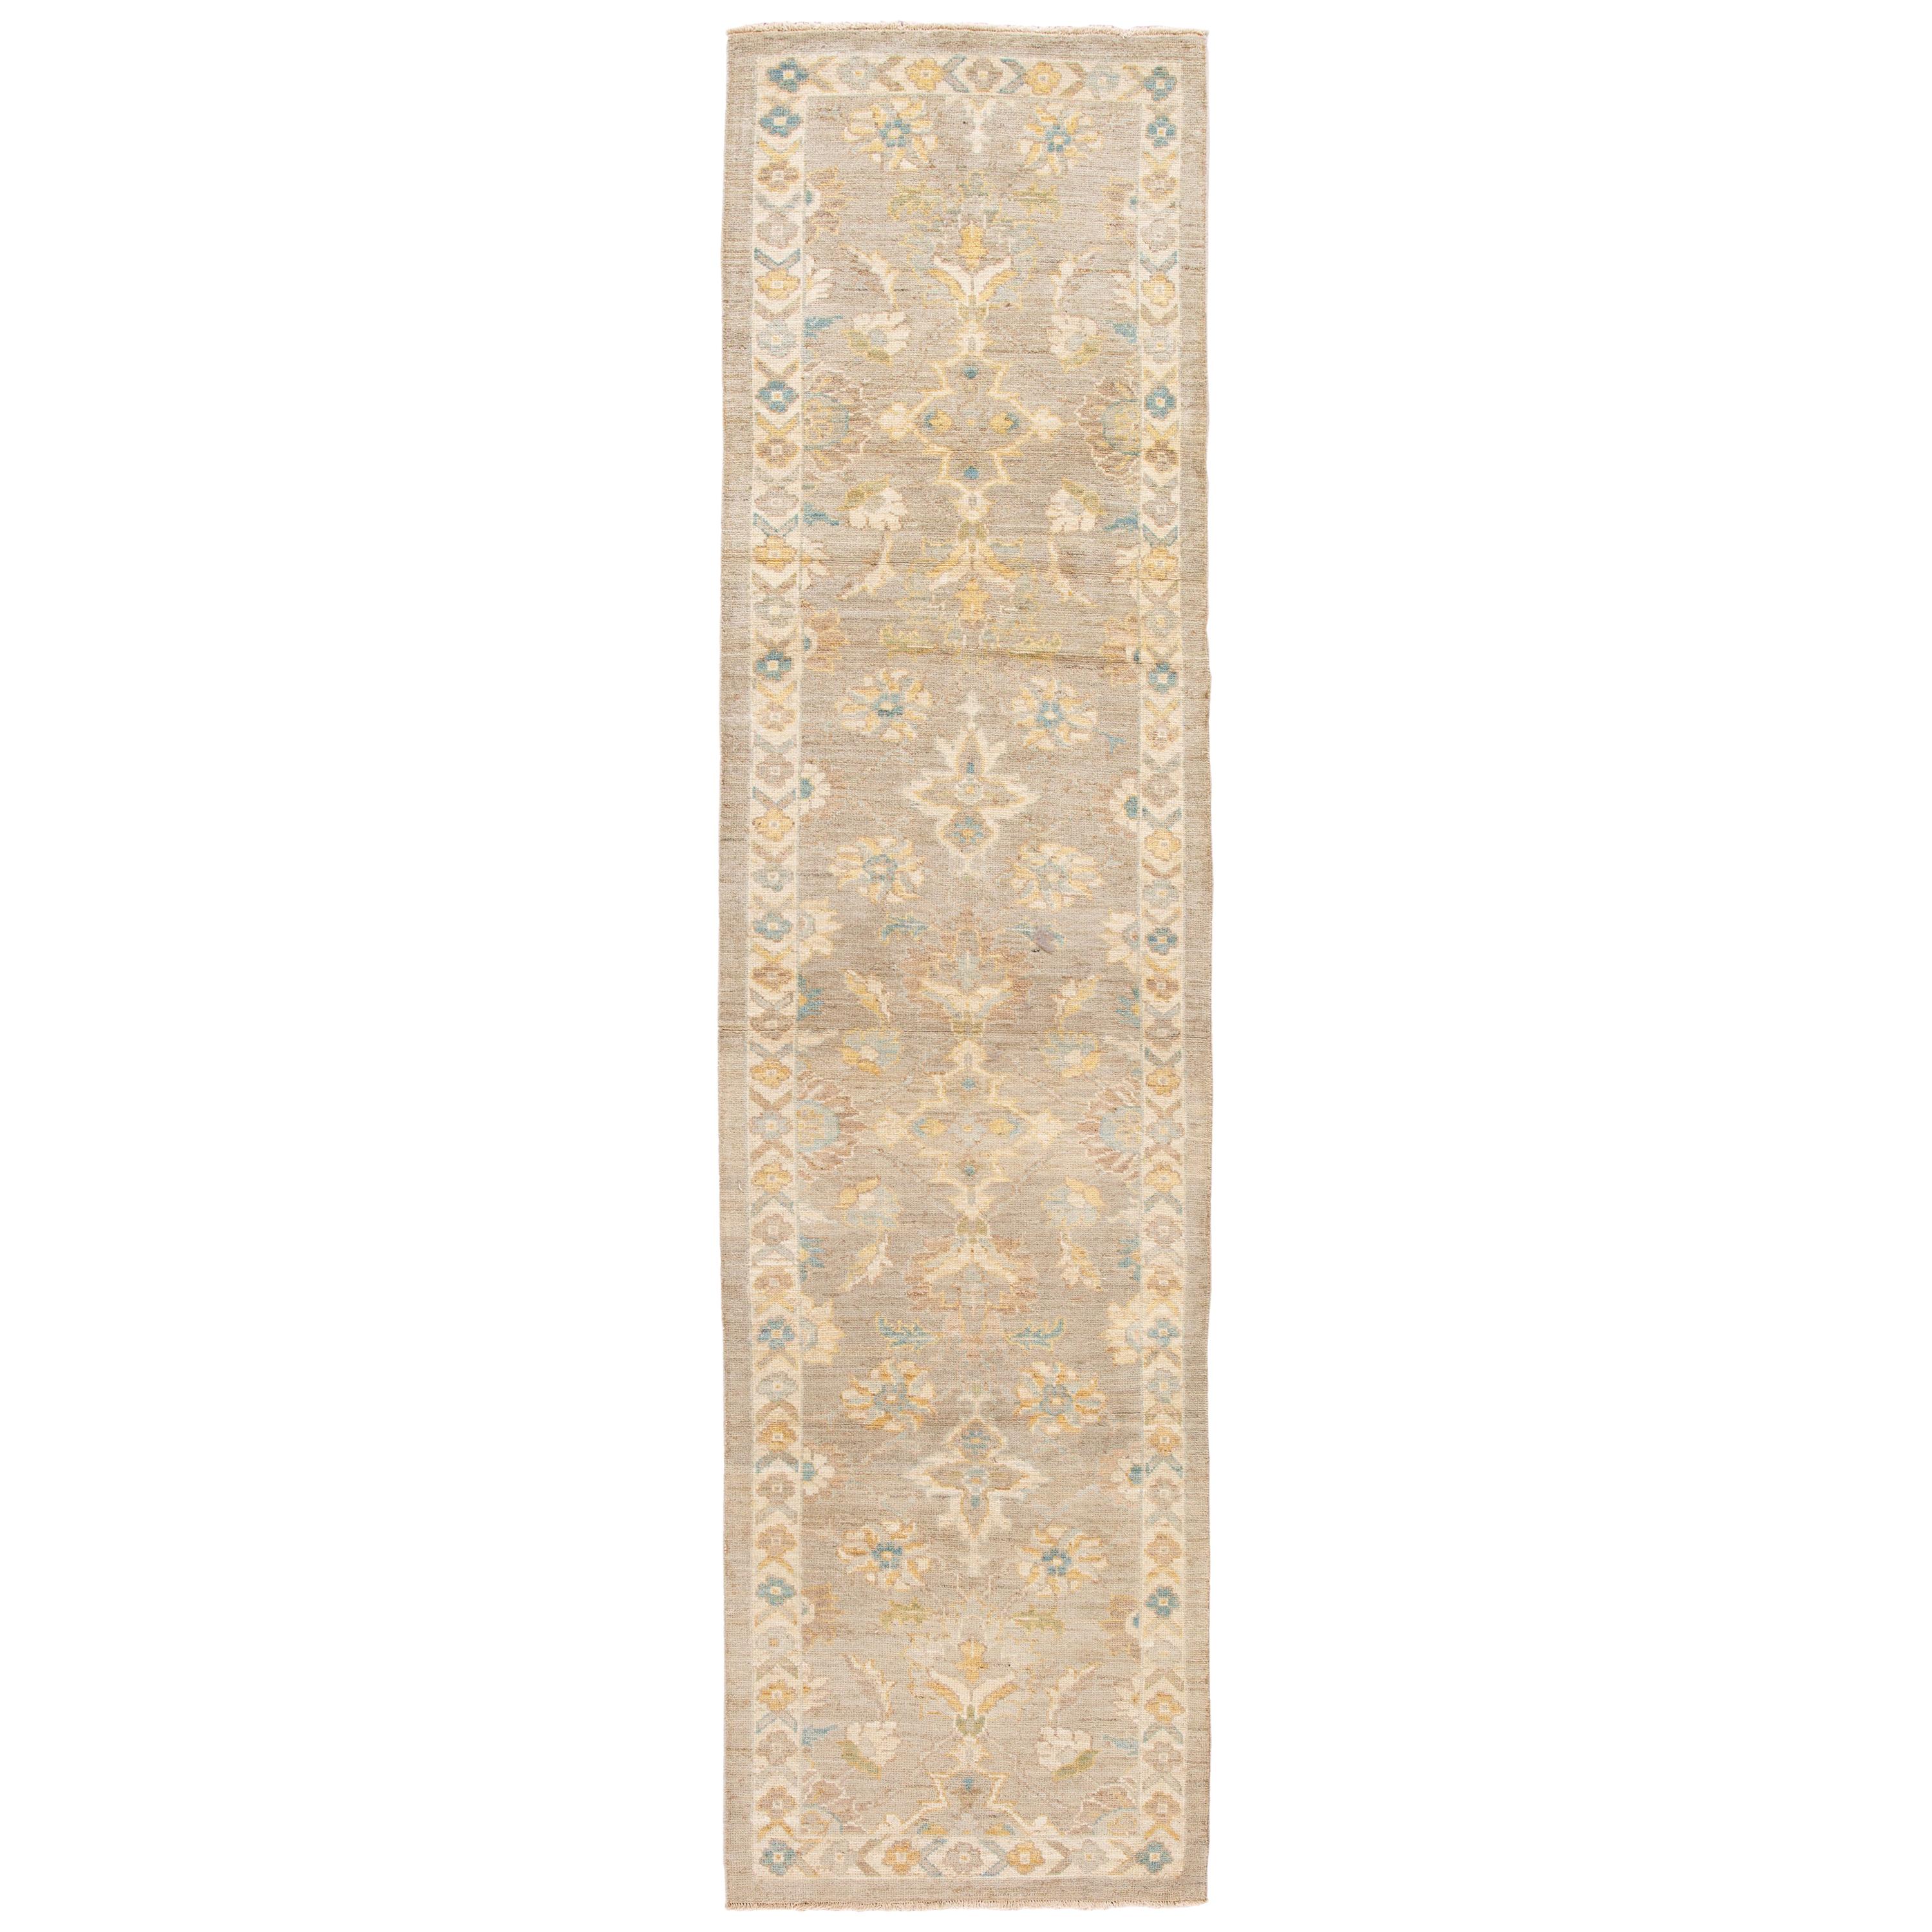 Gray Contemporary Sultanabad Wool Runner with Allover Floral Motif